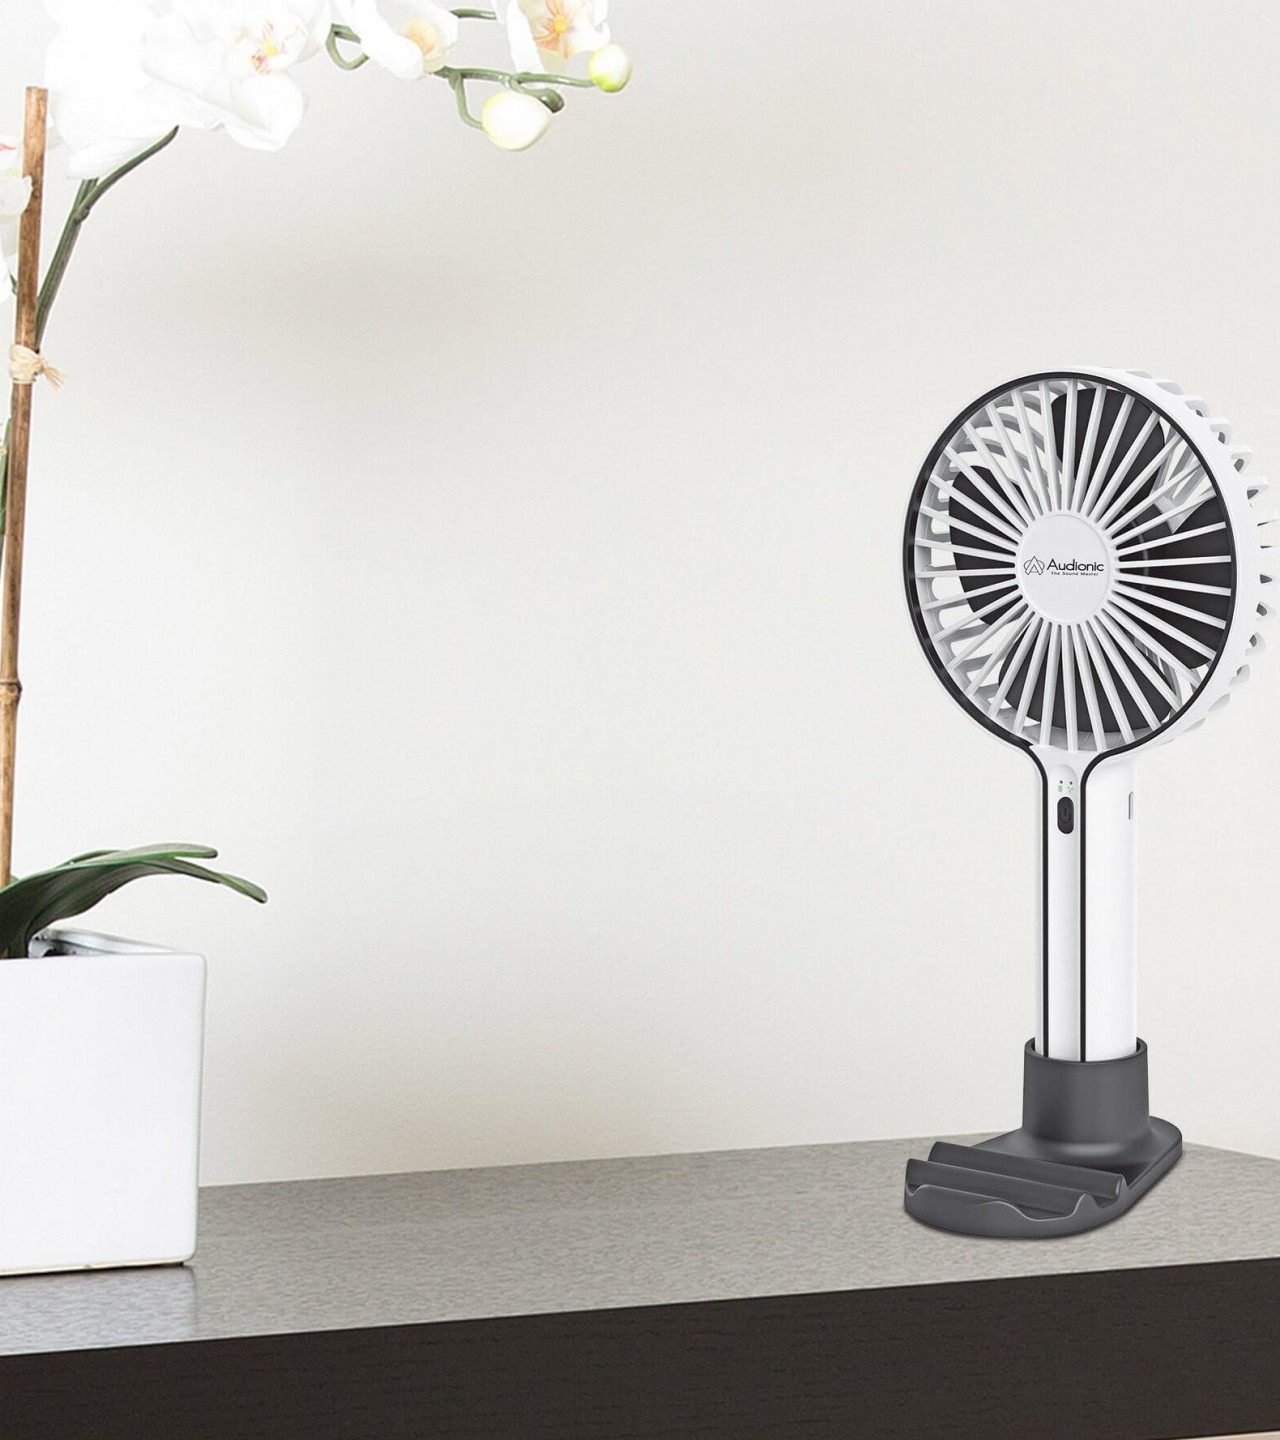 Audionic Airwave USB Rechargeable fan - With Base Mobile Stand